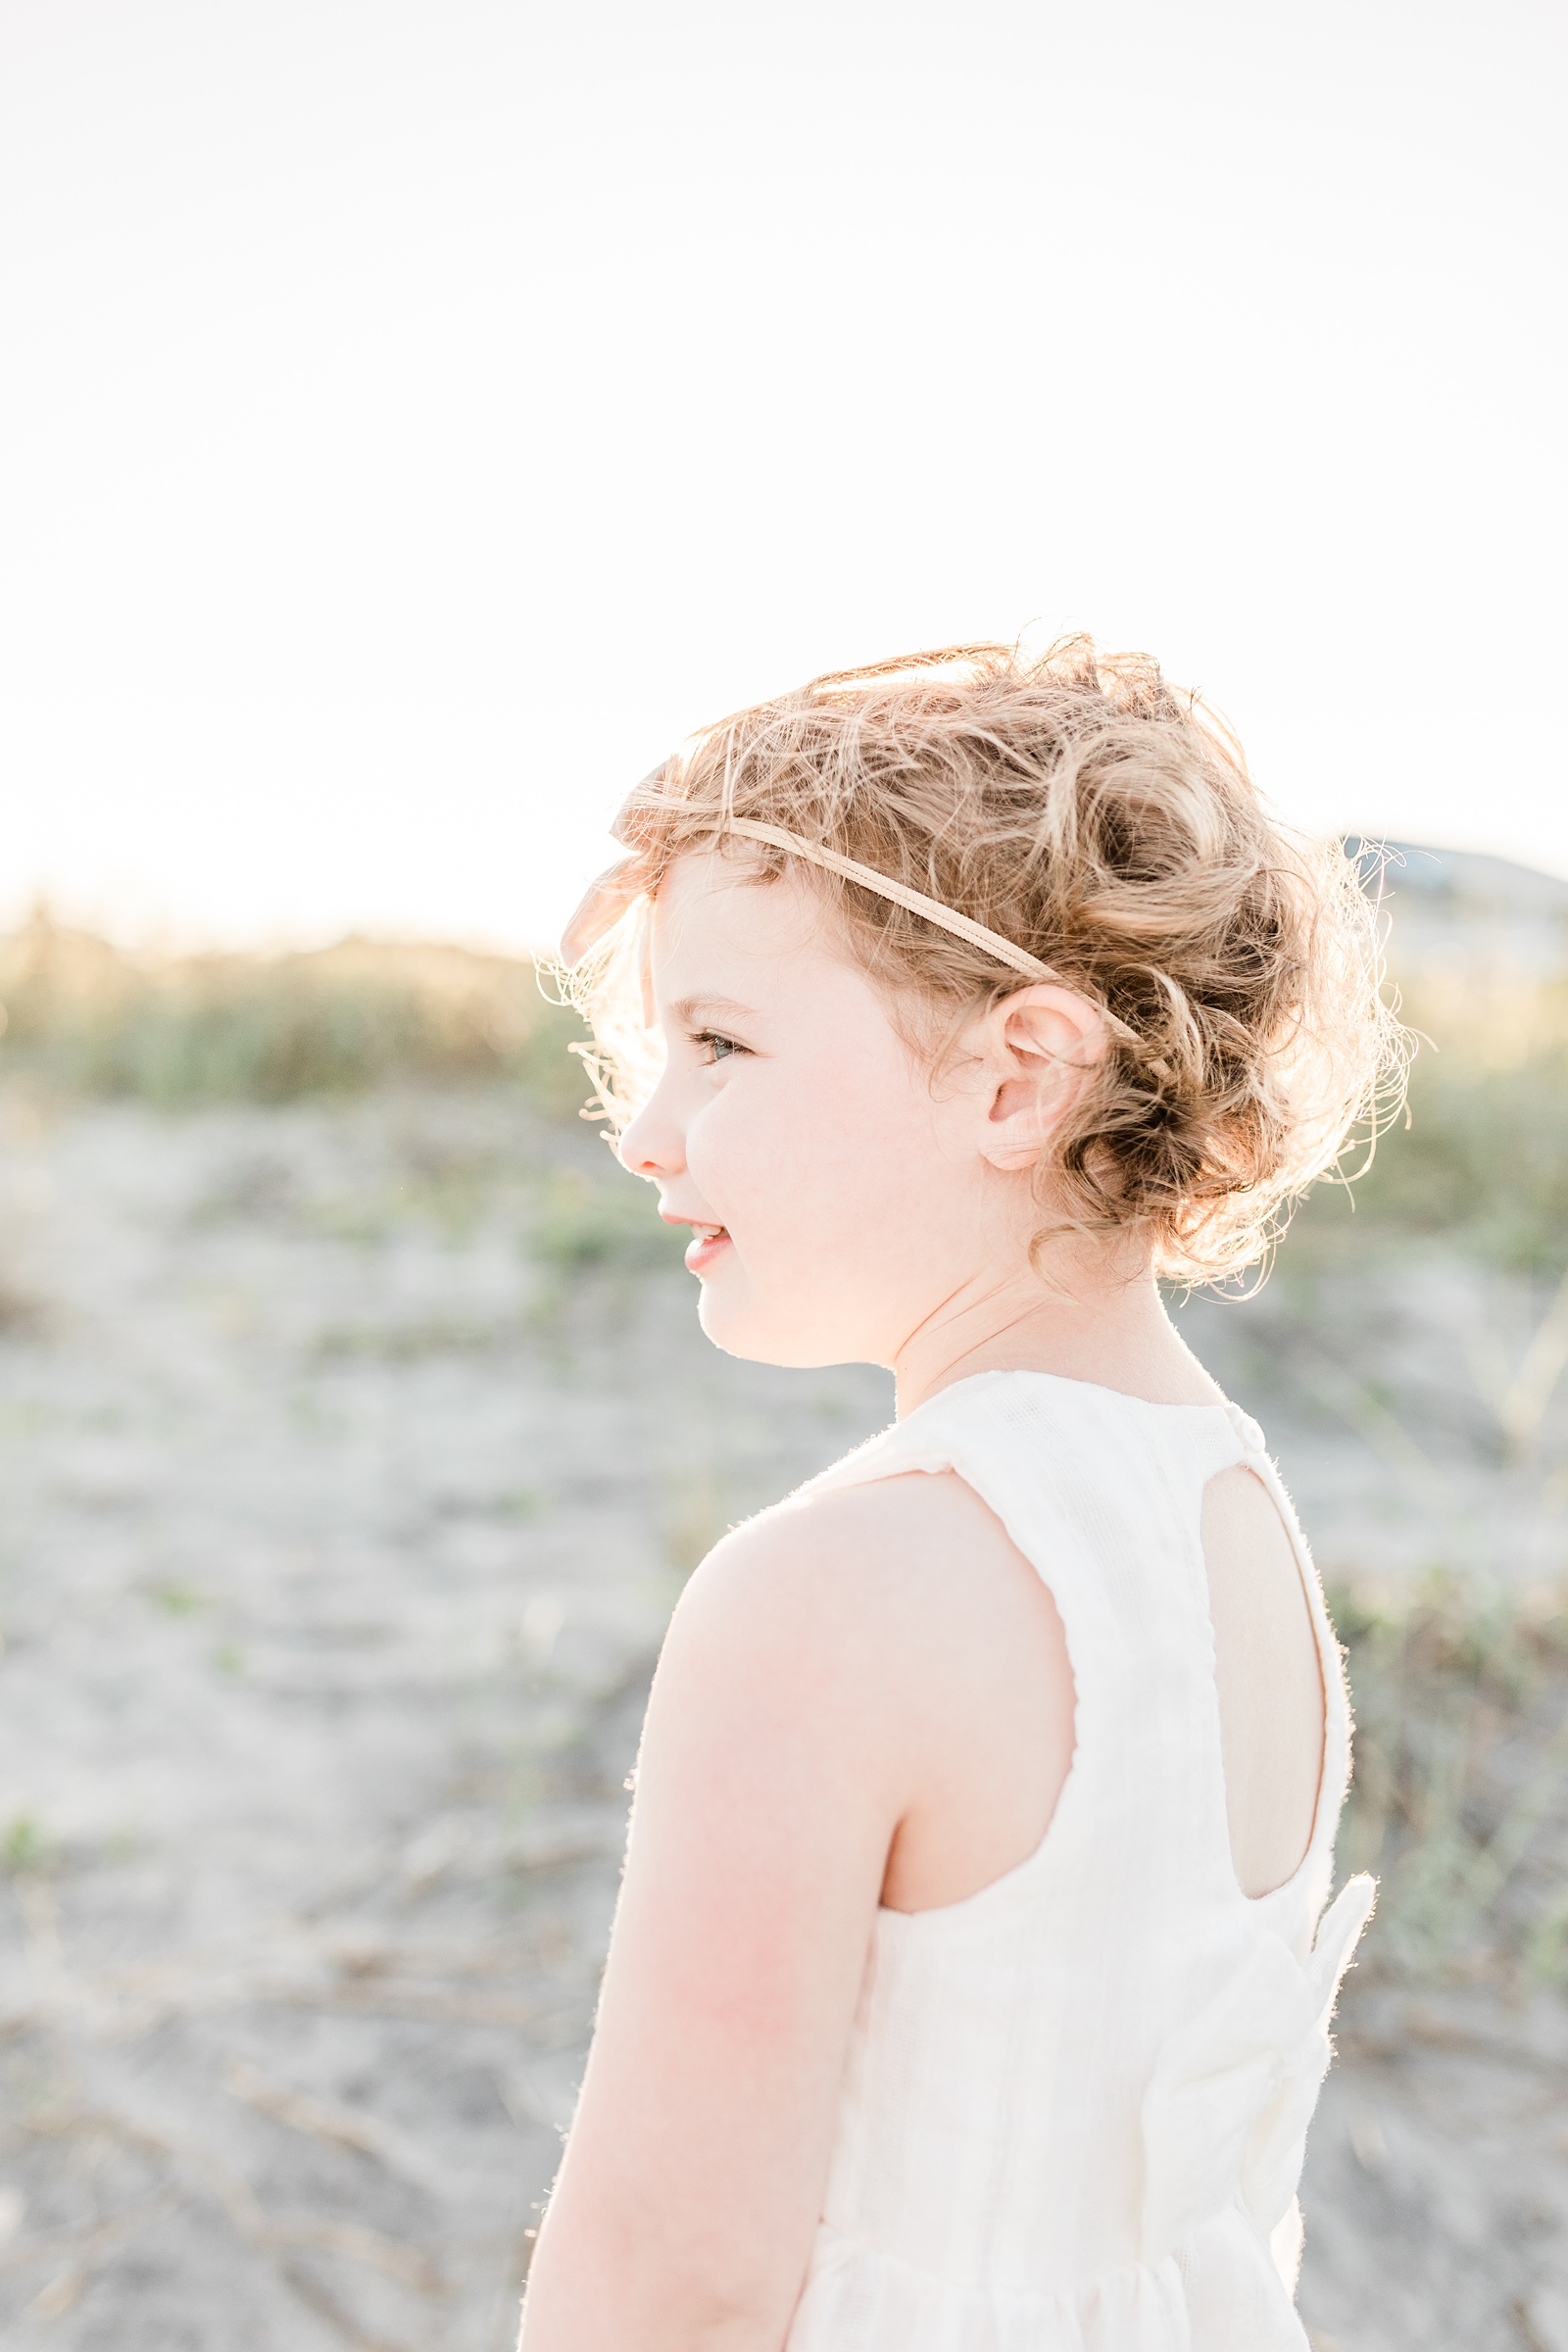 Silhouette of Little girl with curly hair during beach family session by Charleston Family Photographer, Caitlyn Motycka Photography